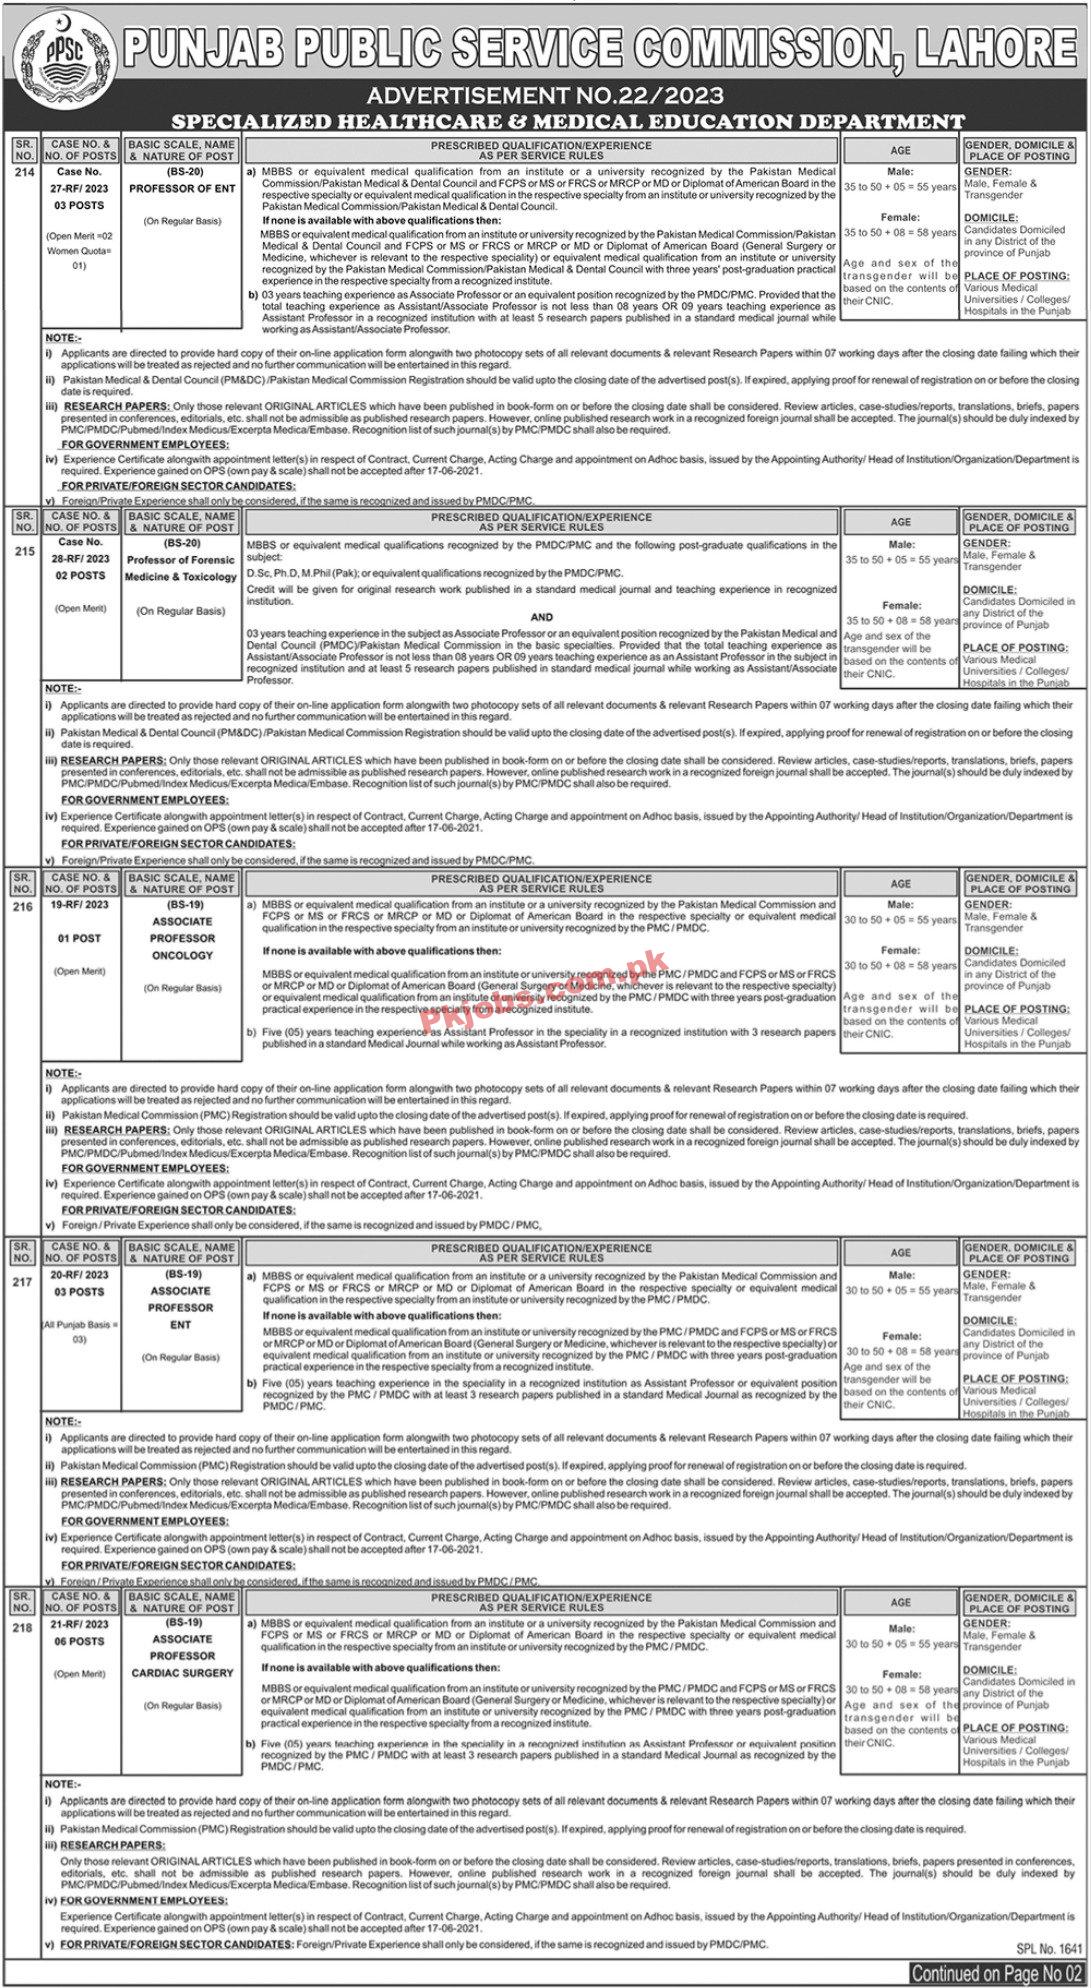 Latest PPSC Jobs | jobs Opportunities at Punjab Public Service Commission